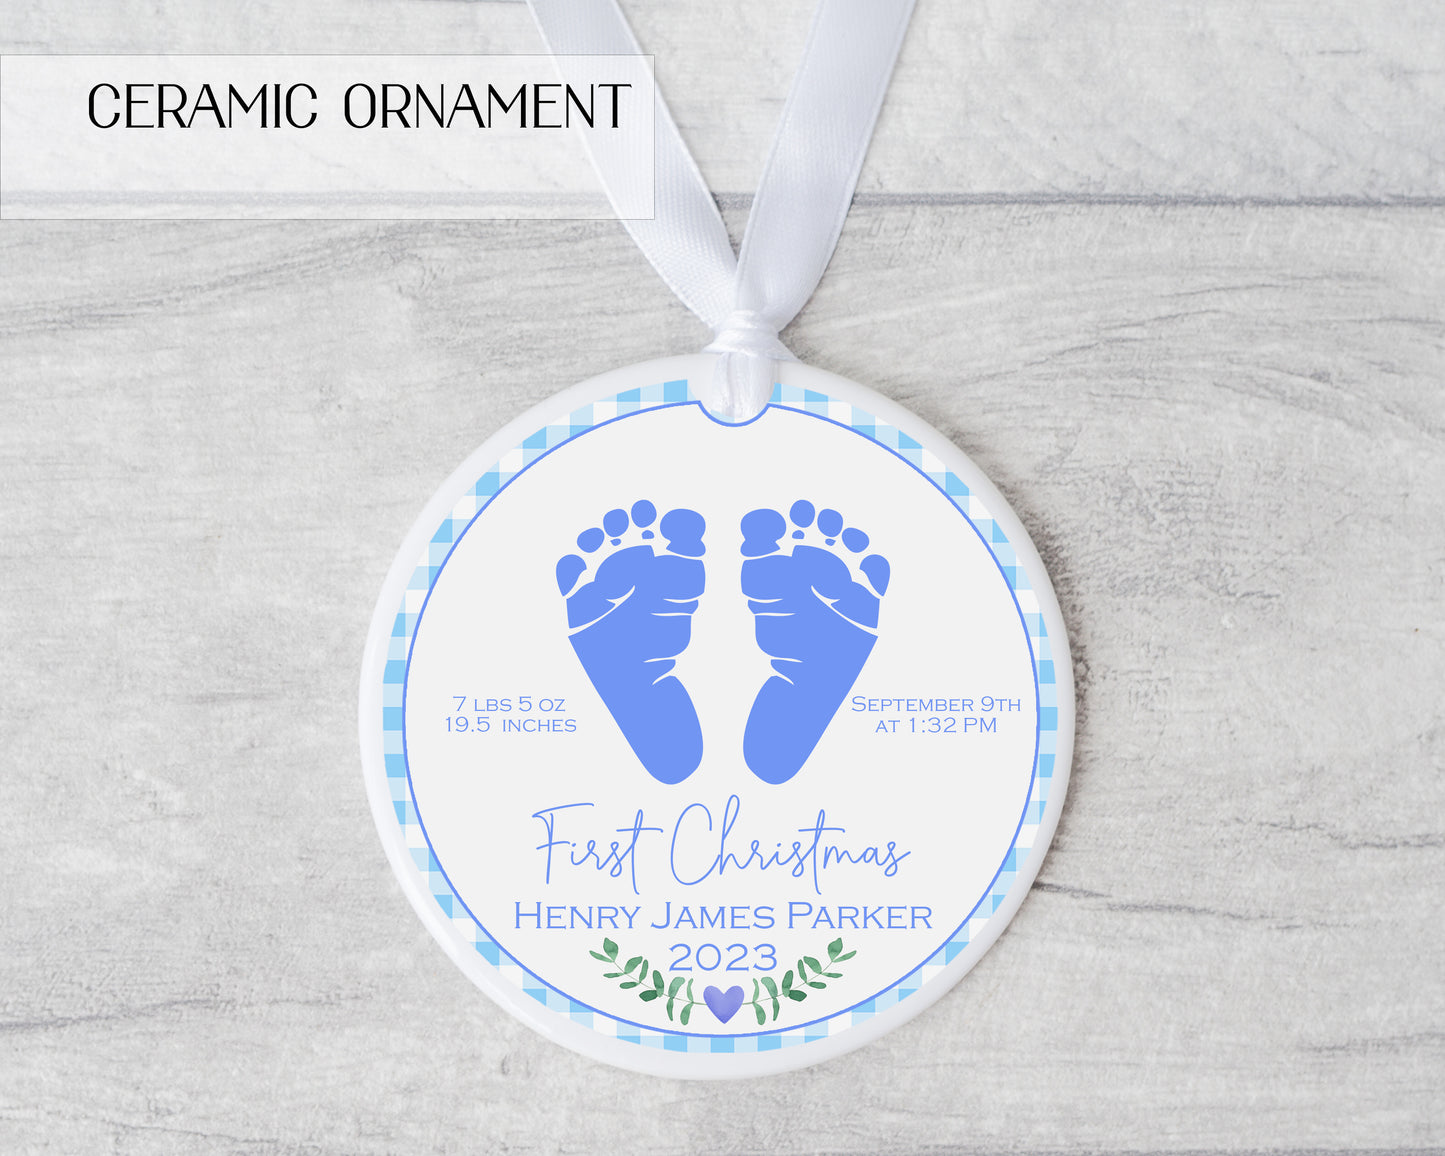 Babys first christmas ornament 2023 - new baby ornament - my first Christmas ornament - Baby first xmas - Babys 1st Xmas - Baby ornament